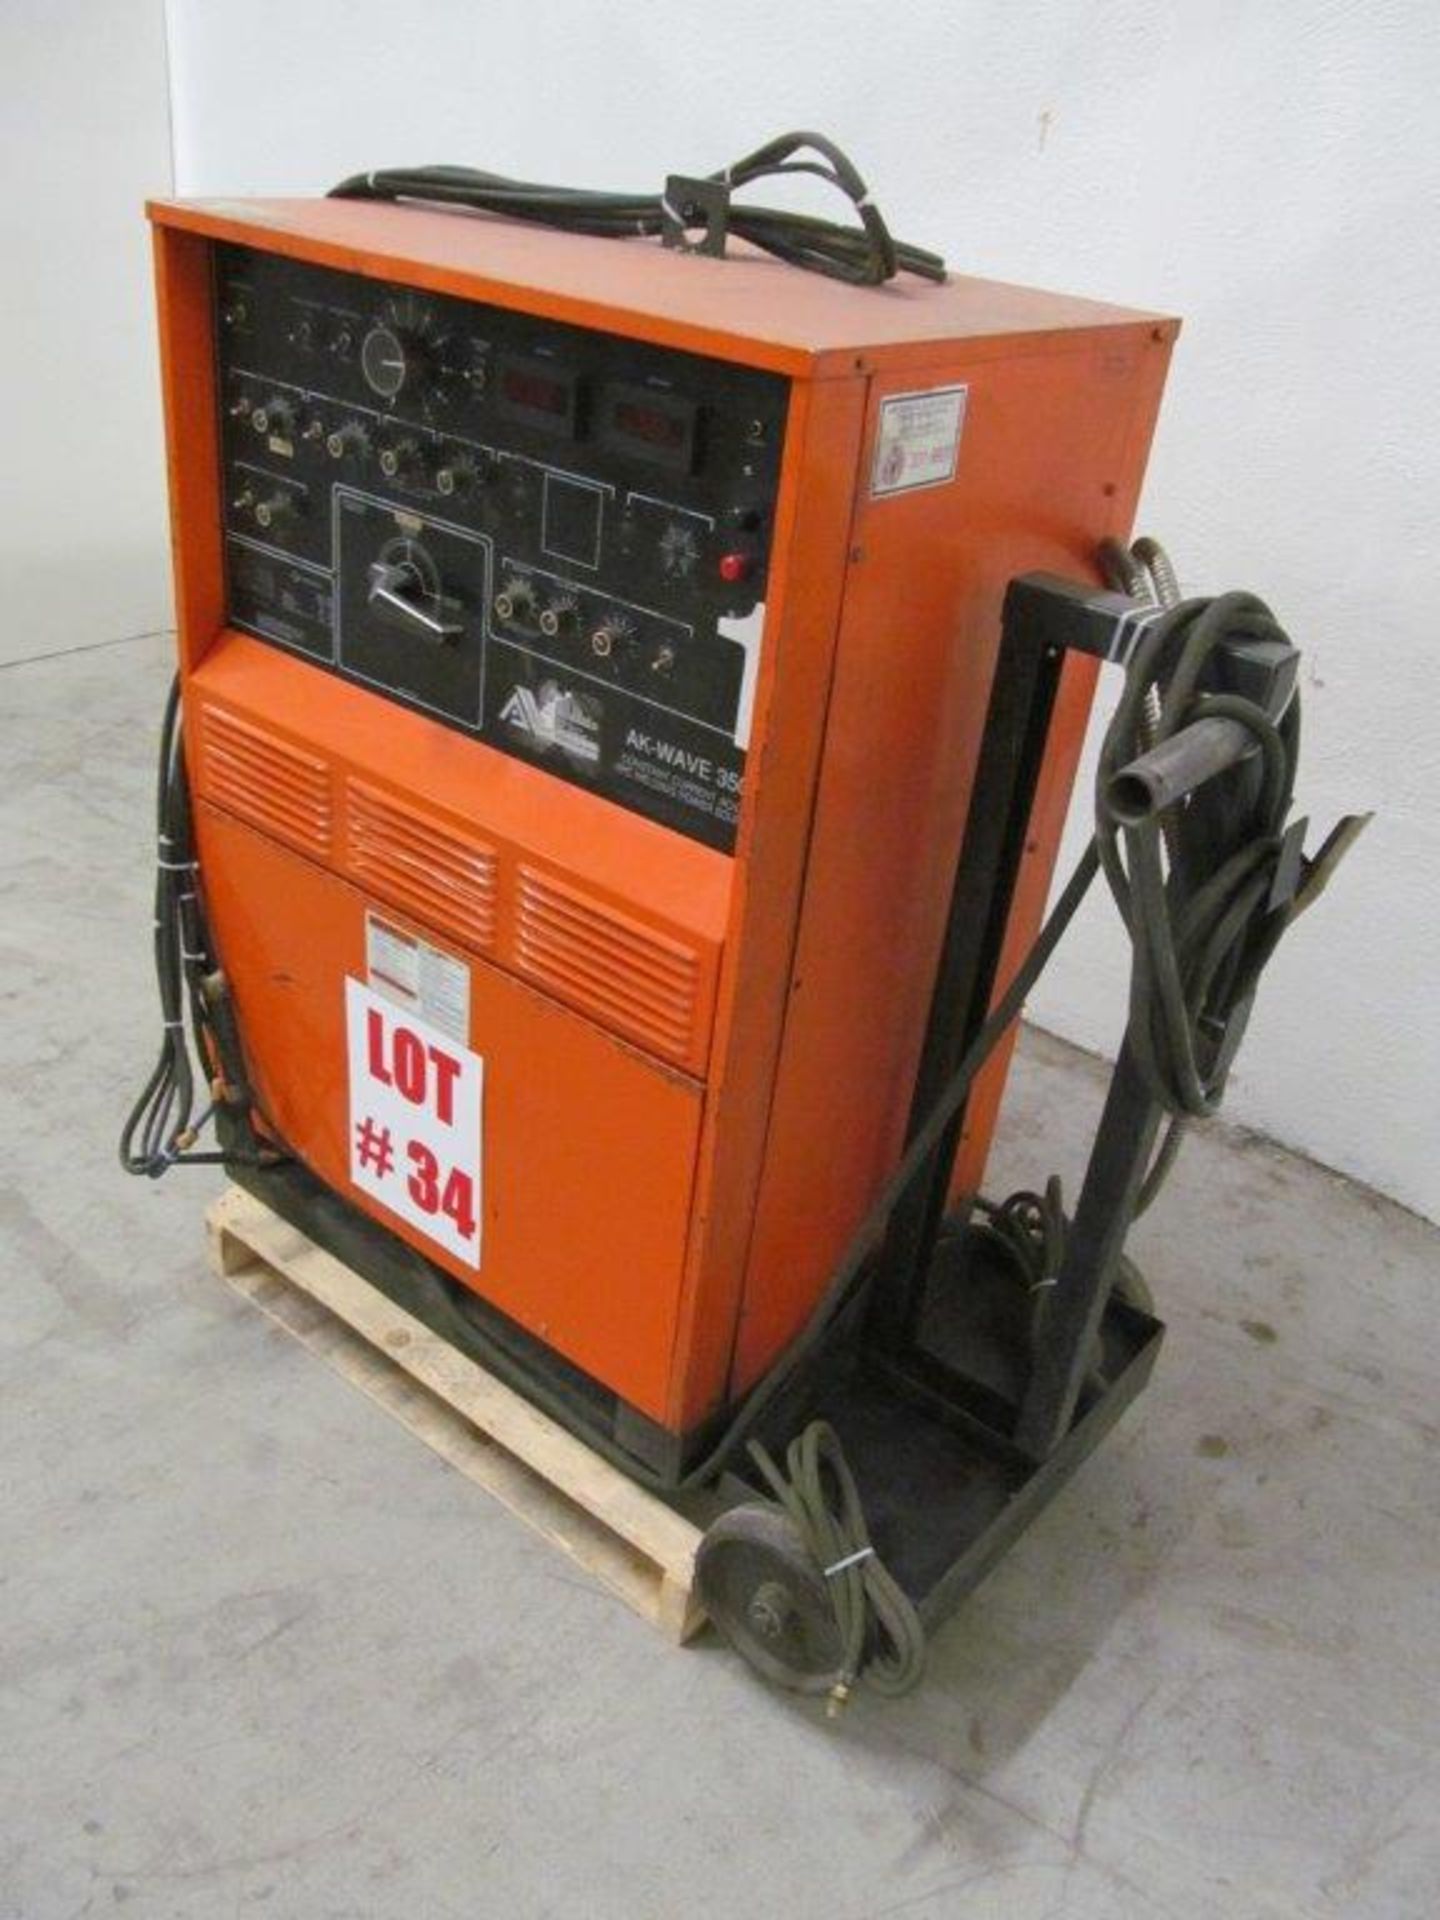 ACKLAND AK0WAVE 350 CONSTANT CURRENT AC/DC ARC POWER SOURCE - Image 3 of 4